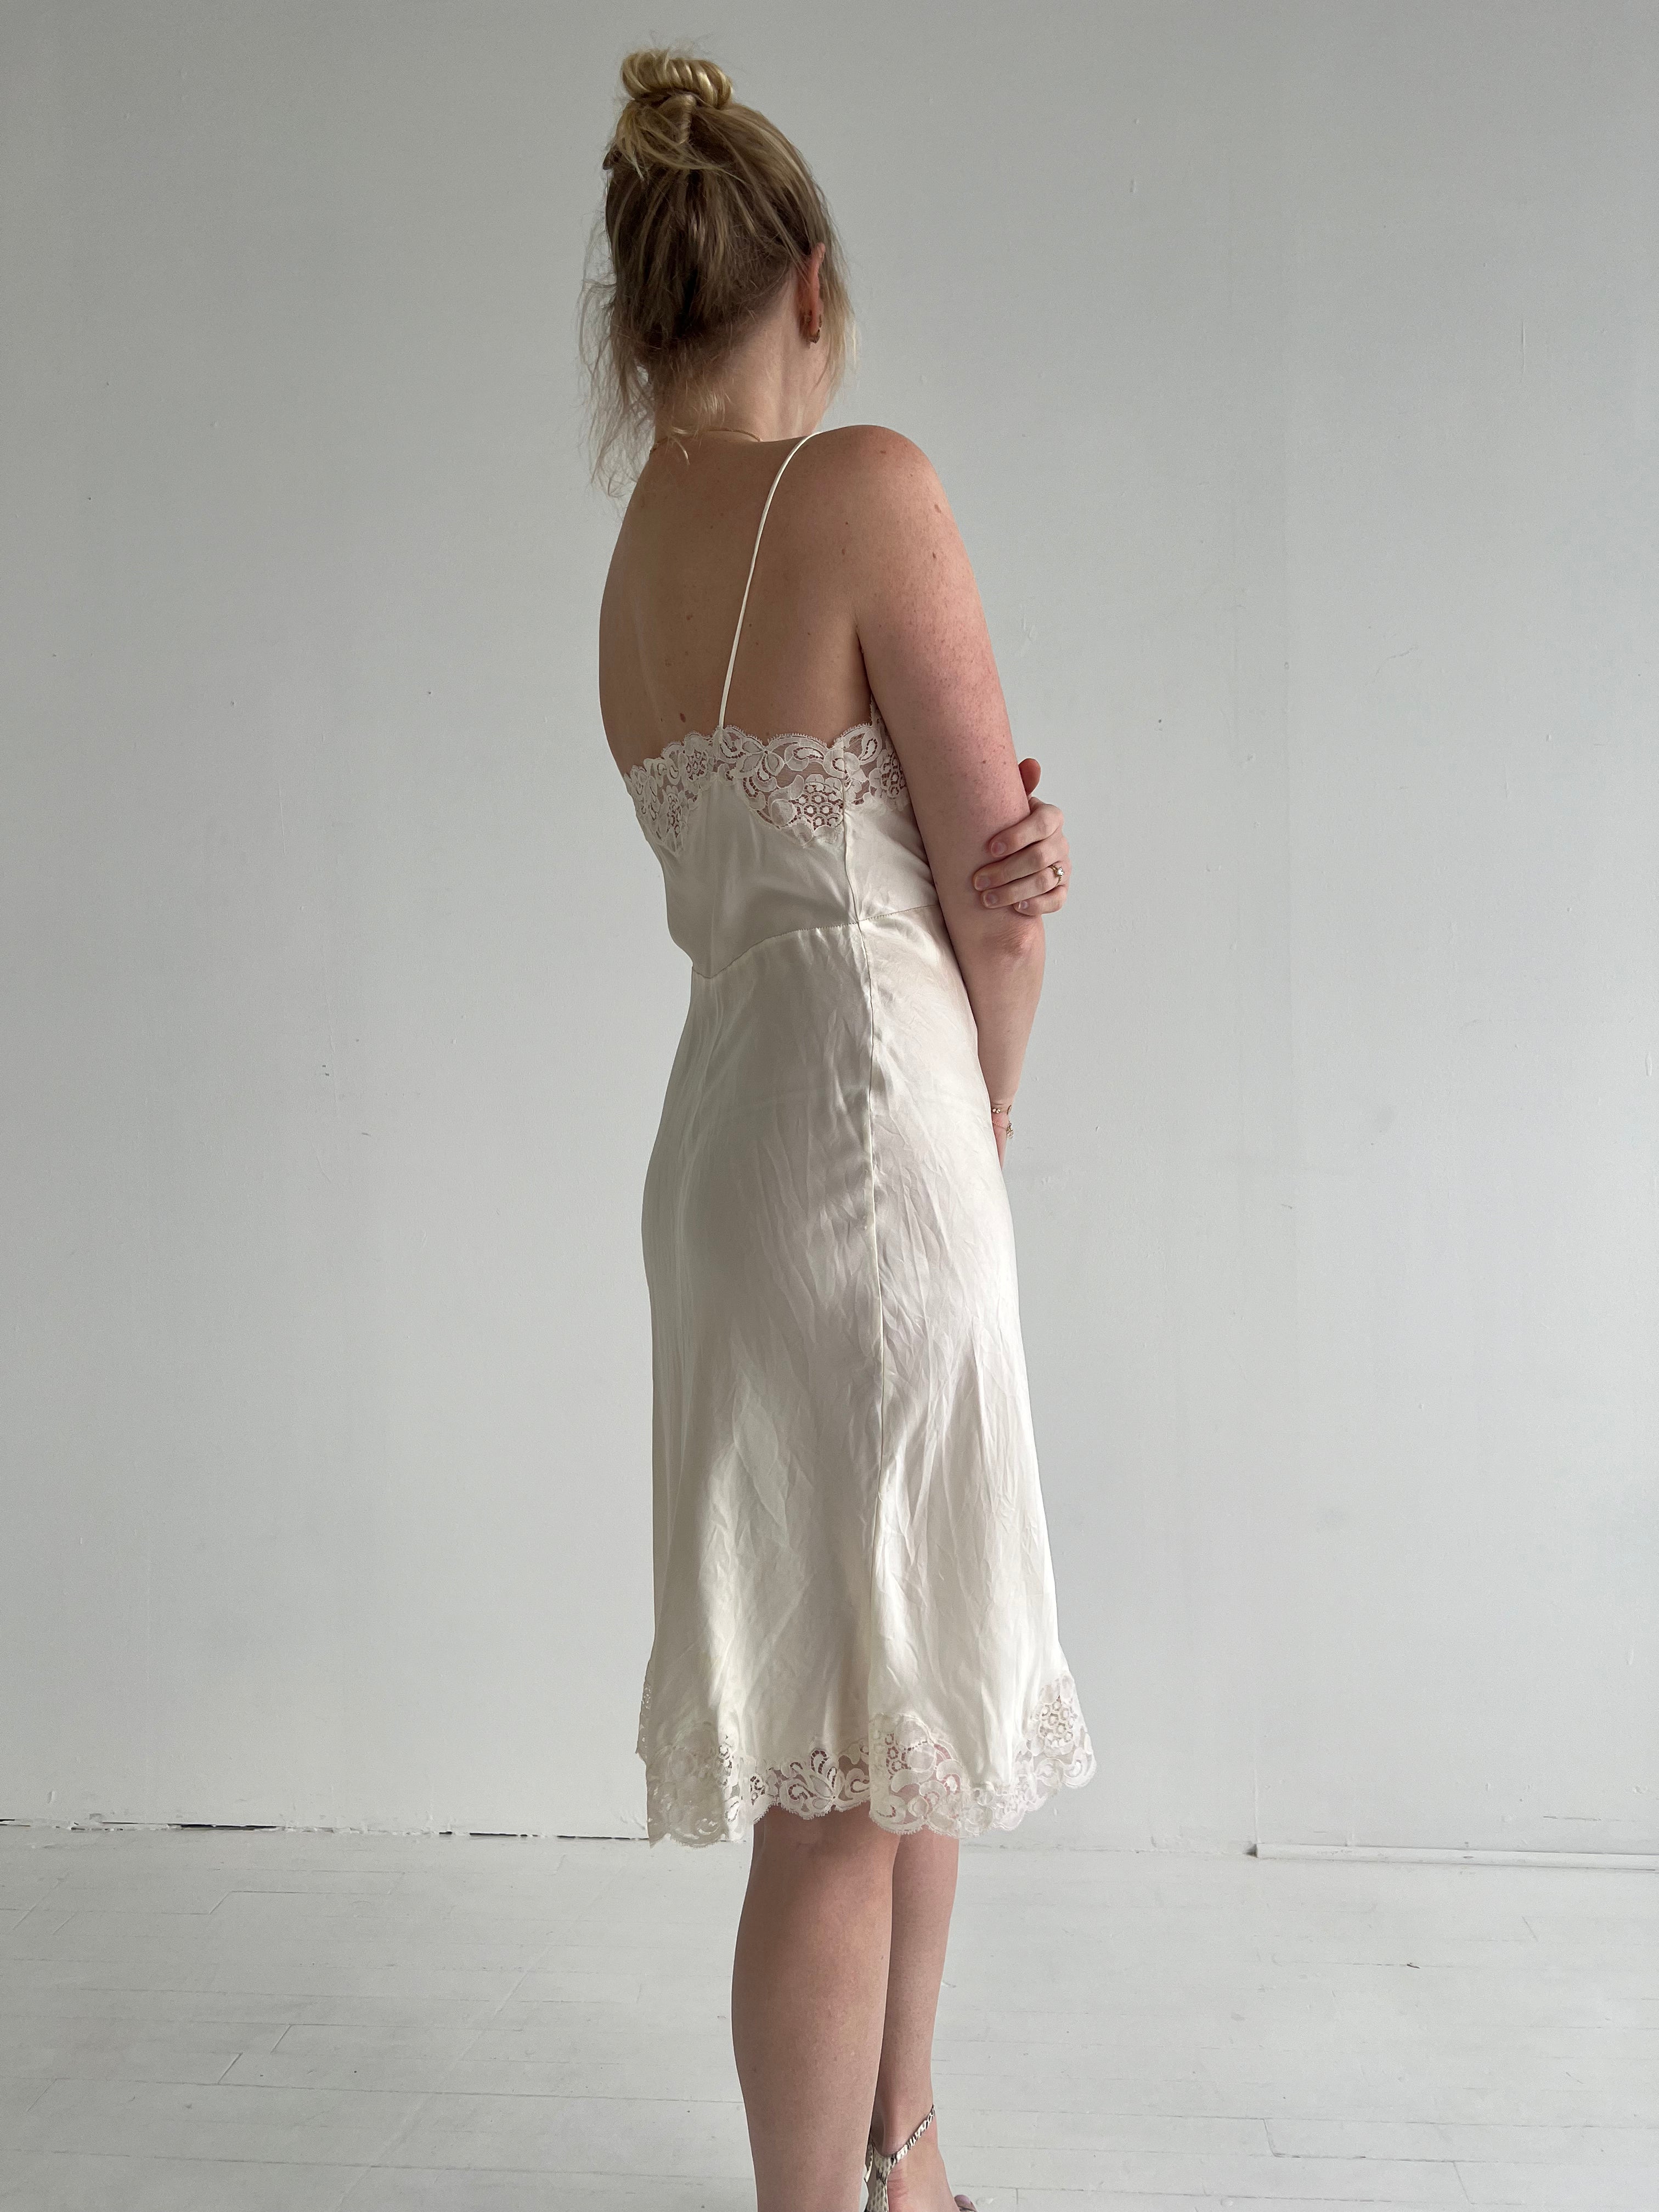 1940's White Silk Slip Dress with Lace